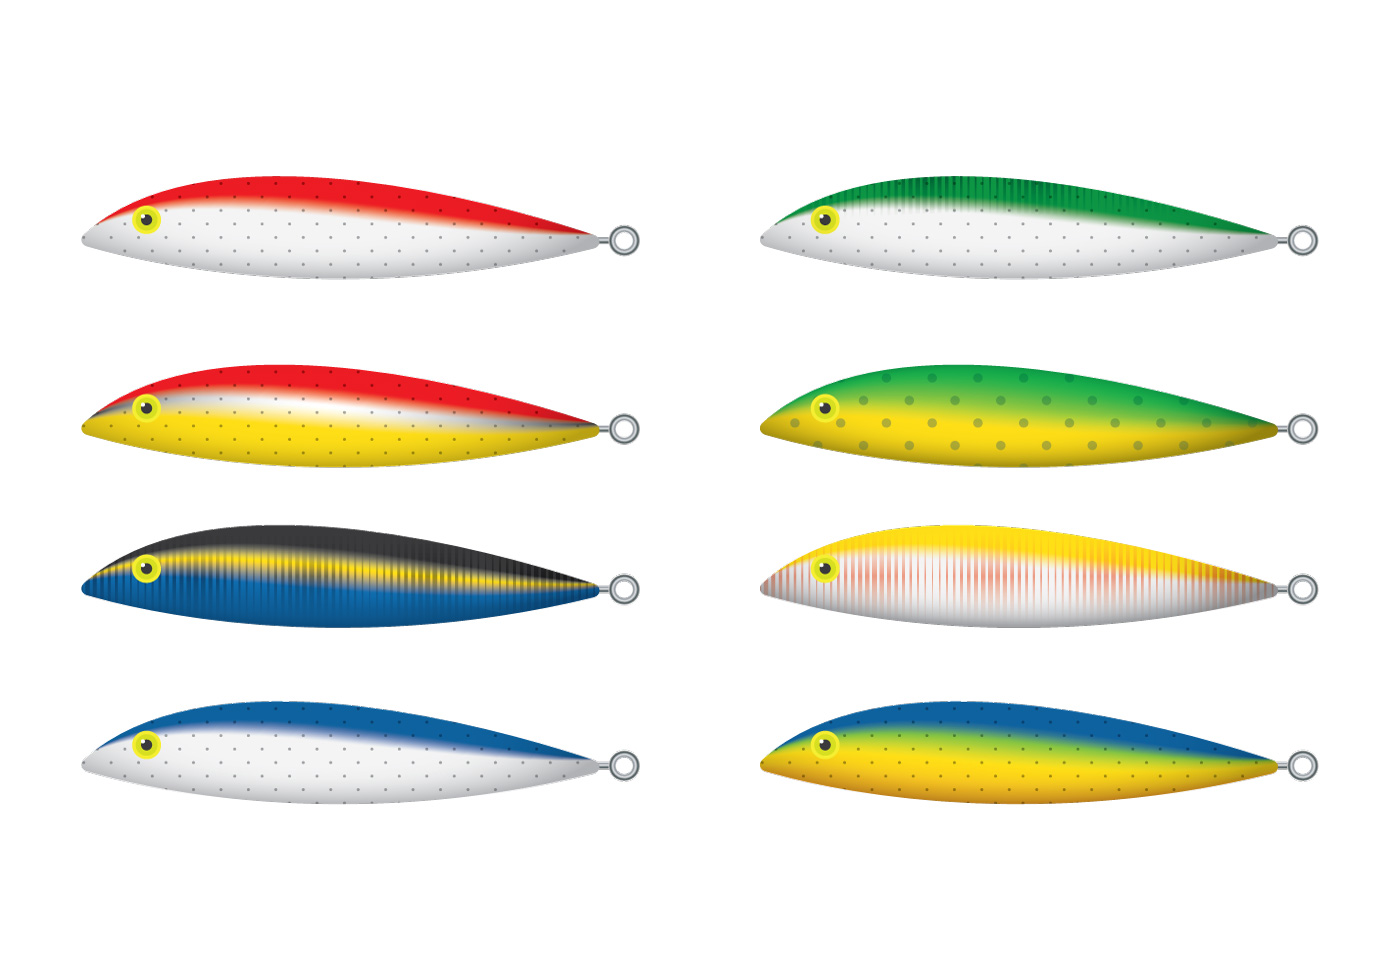 Download Floating Rapala Fishing Lure Vectors - Download Free ...